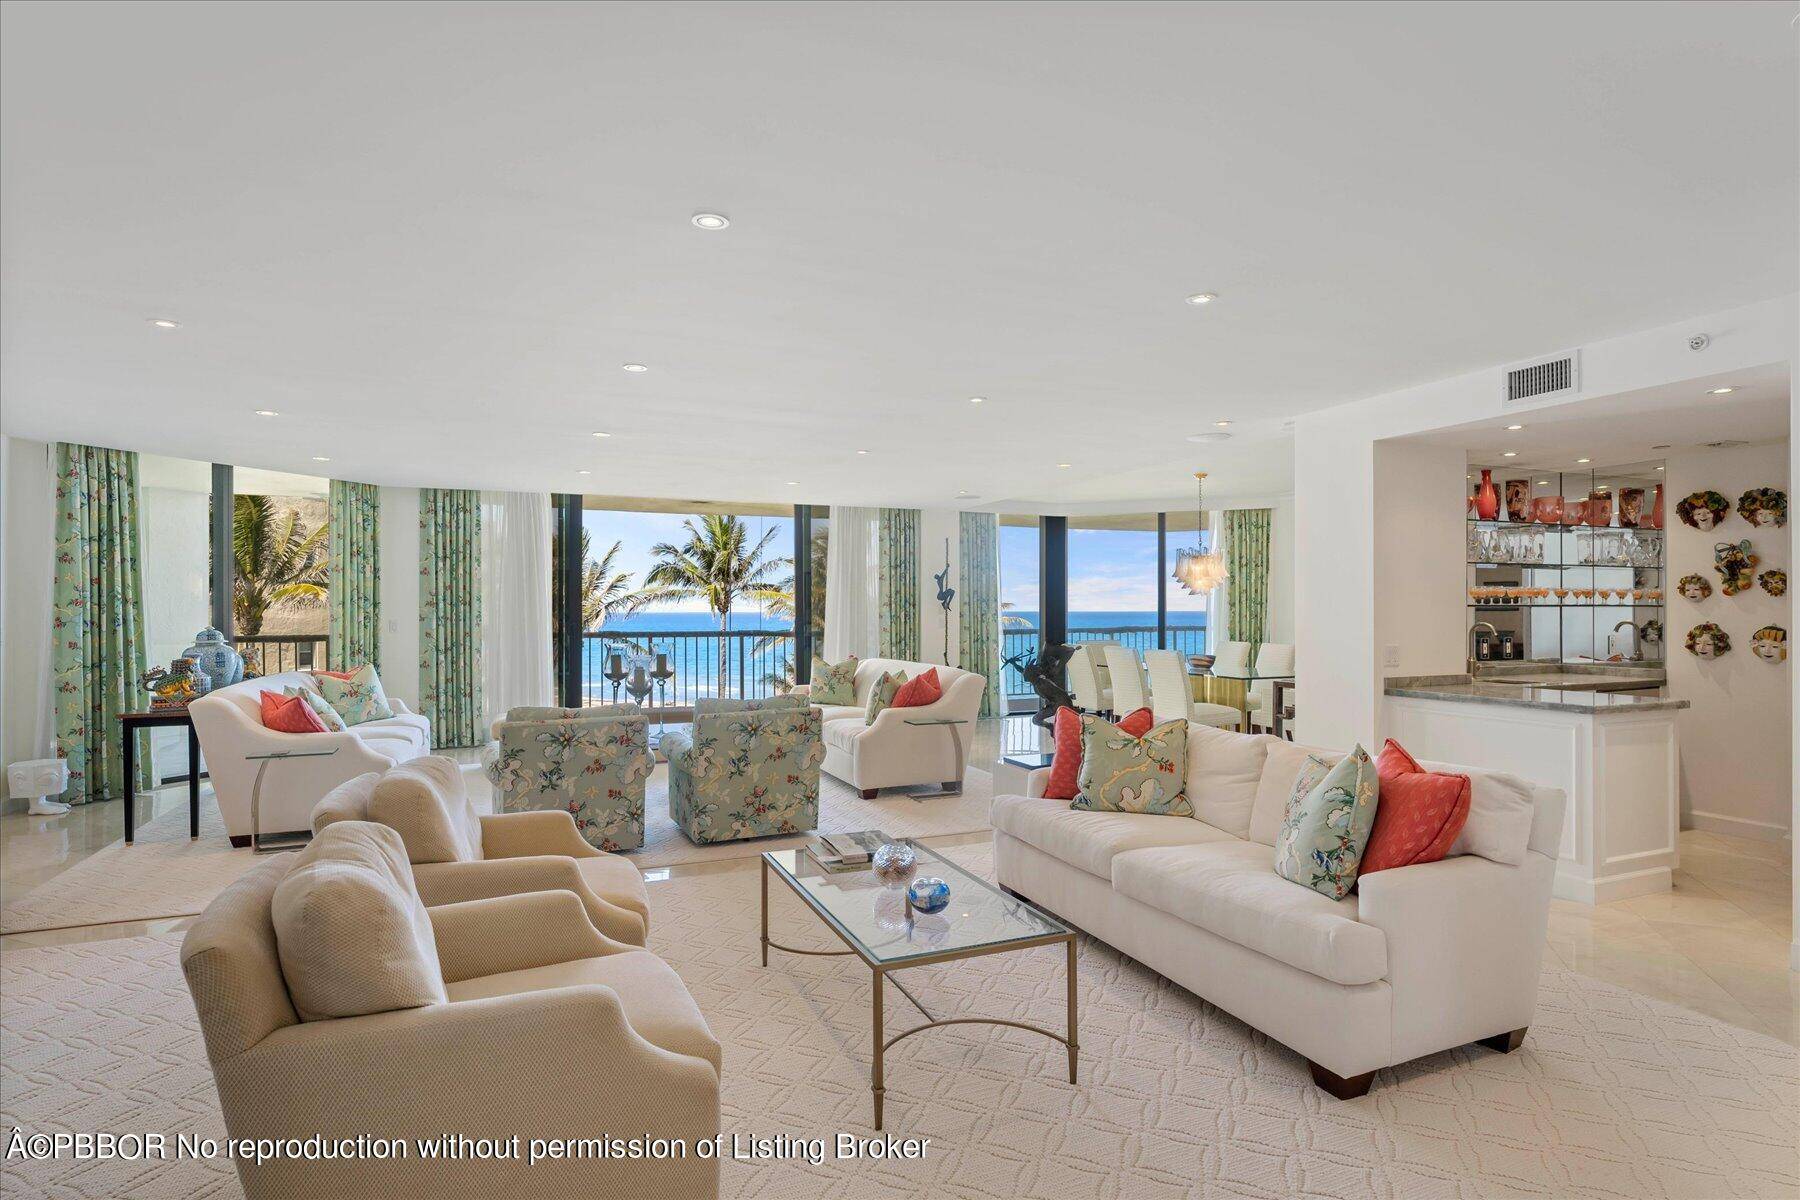 Sensational 3 bedroom 4. 5 baths offering on a high floor with breathtaking wide ocean views in prestigious 2770 is attractively priced to sell.